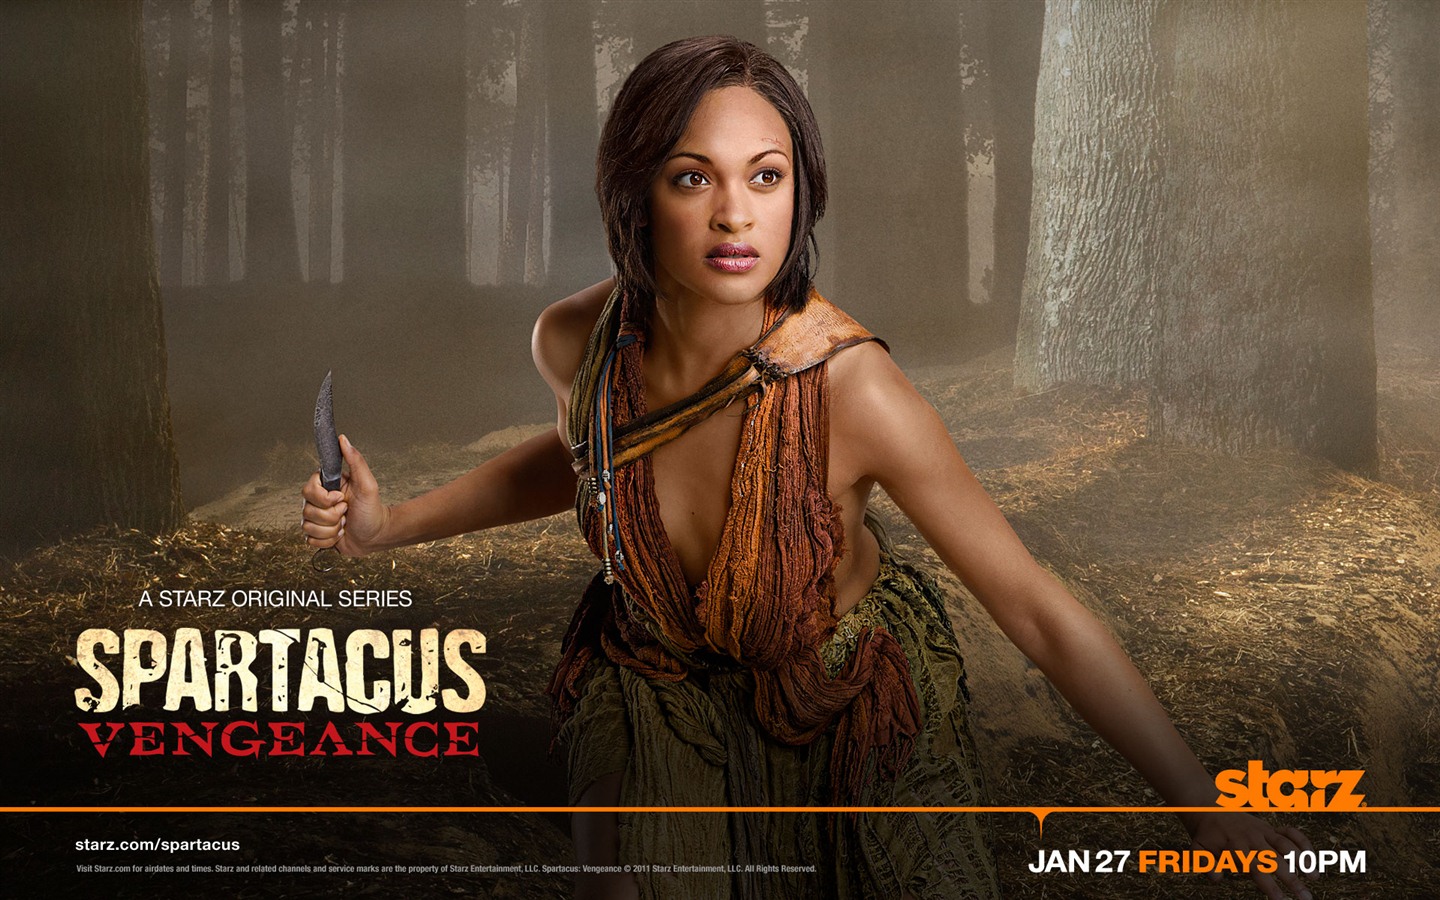 Spartacus: Vengeance HD wallpapers #5 - 1440x900